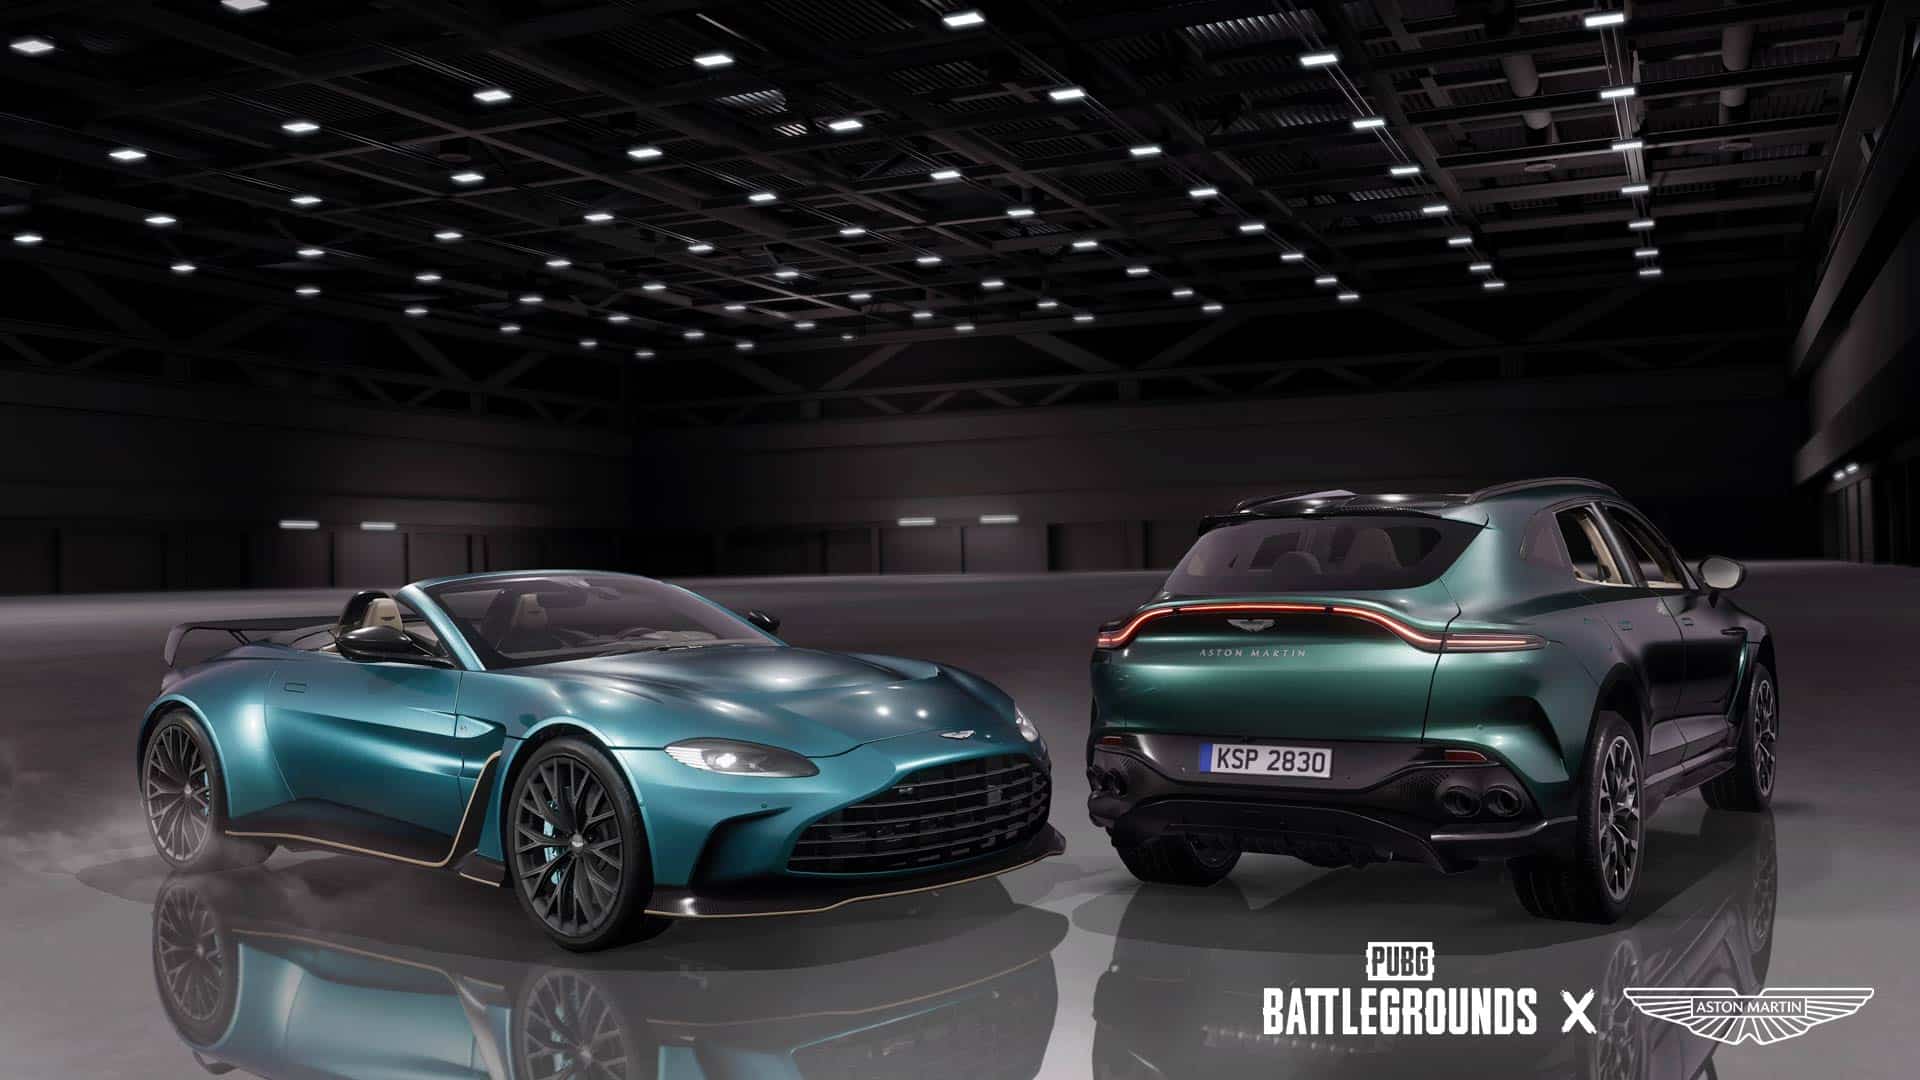 PUBG Top Gear: Aston Martin collaboration and commercial partnership with BBC Top Gear announced